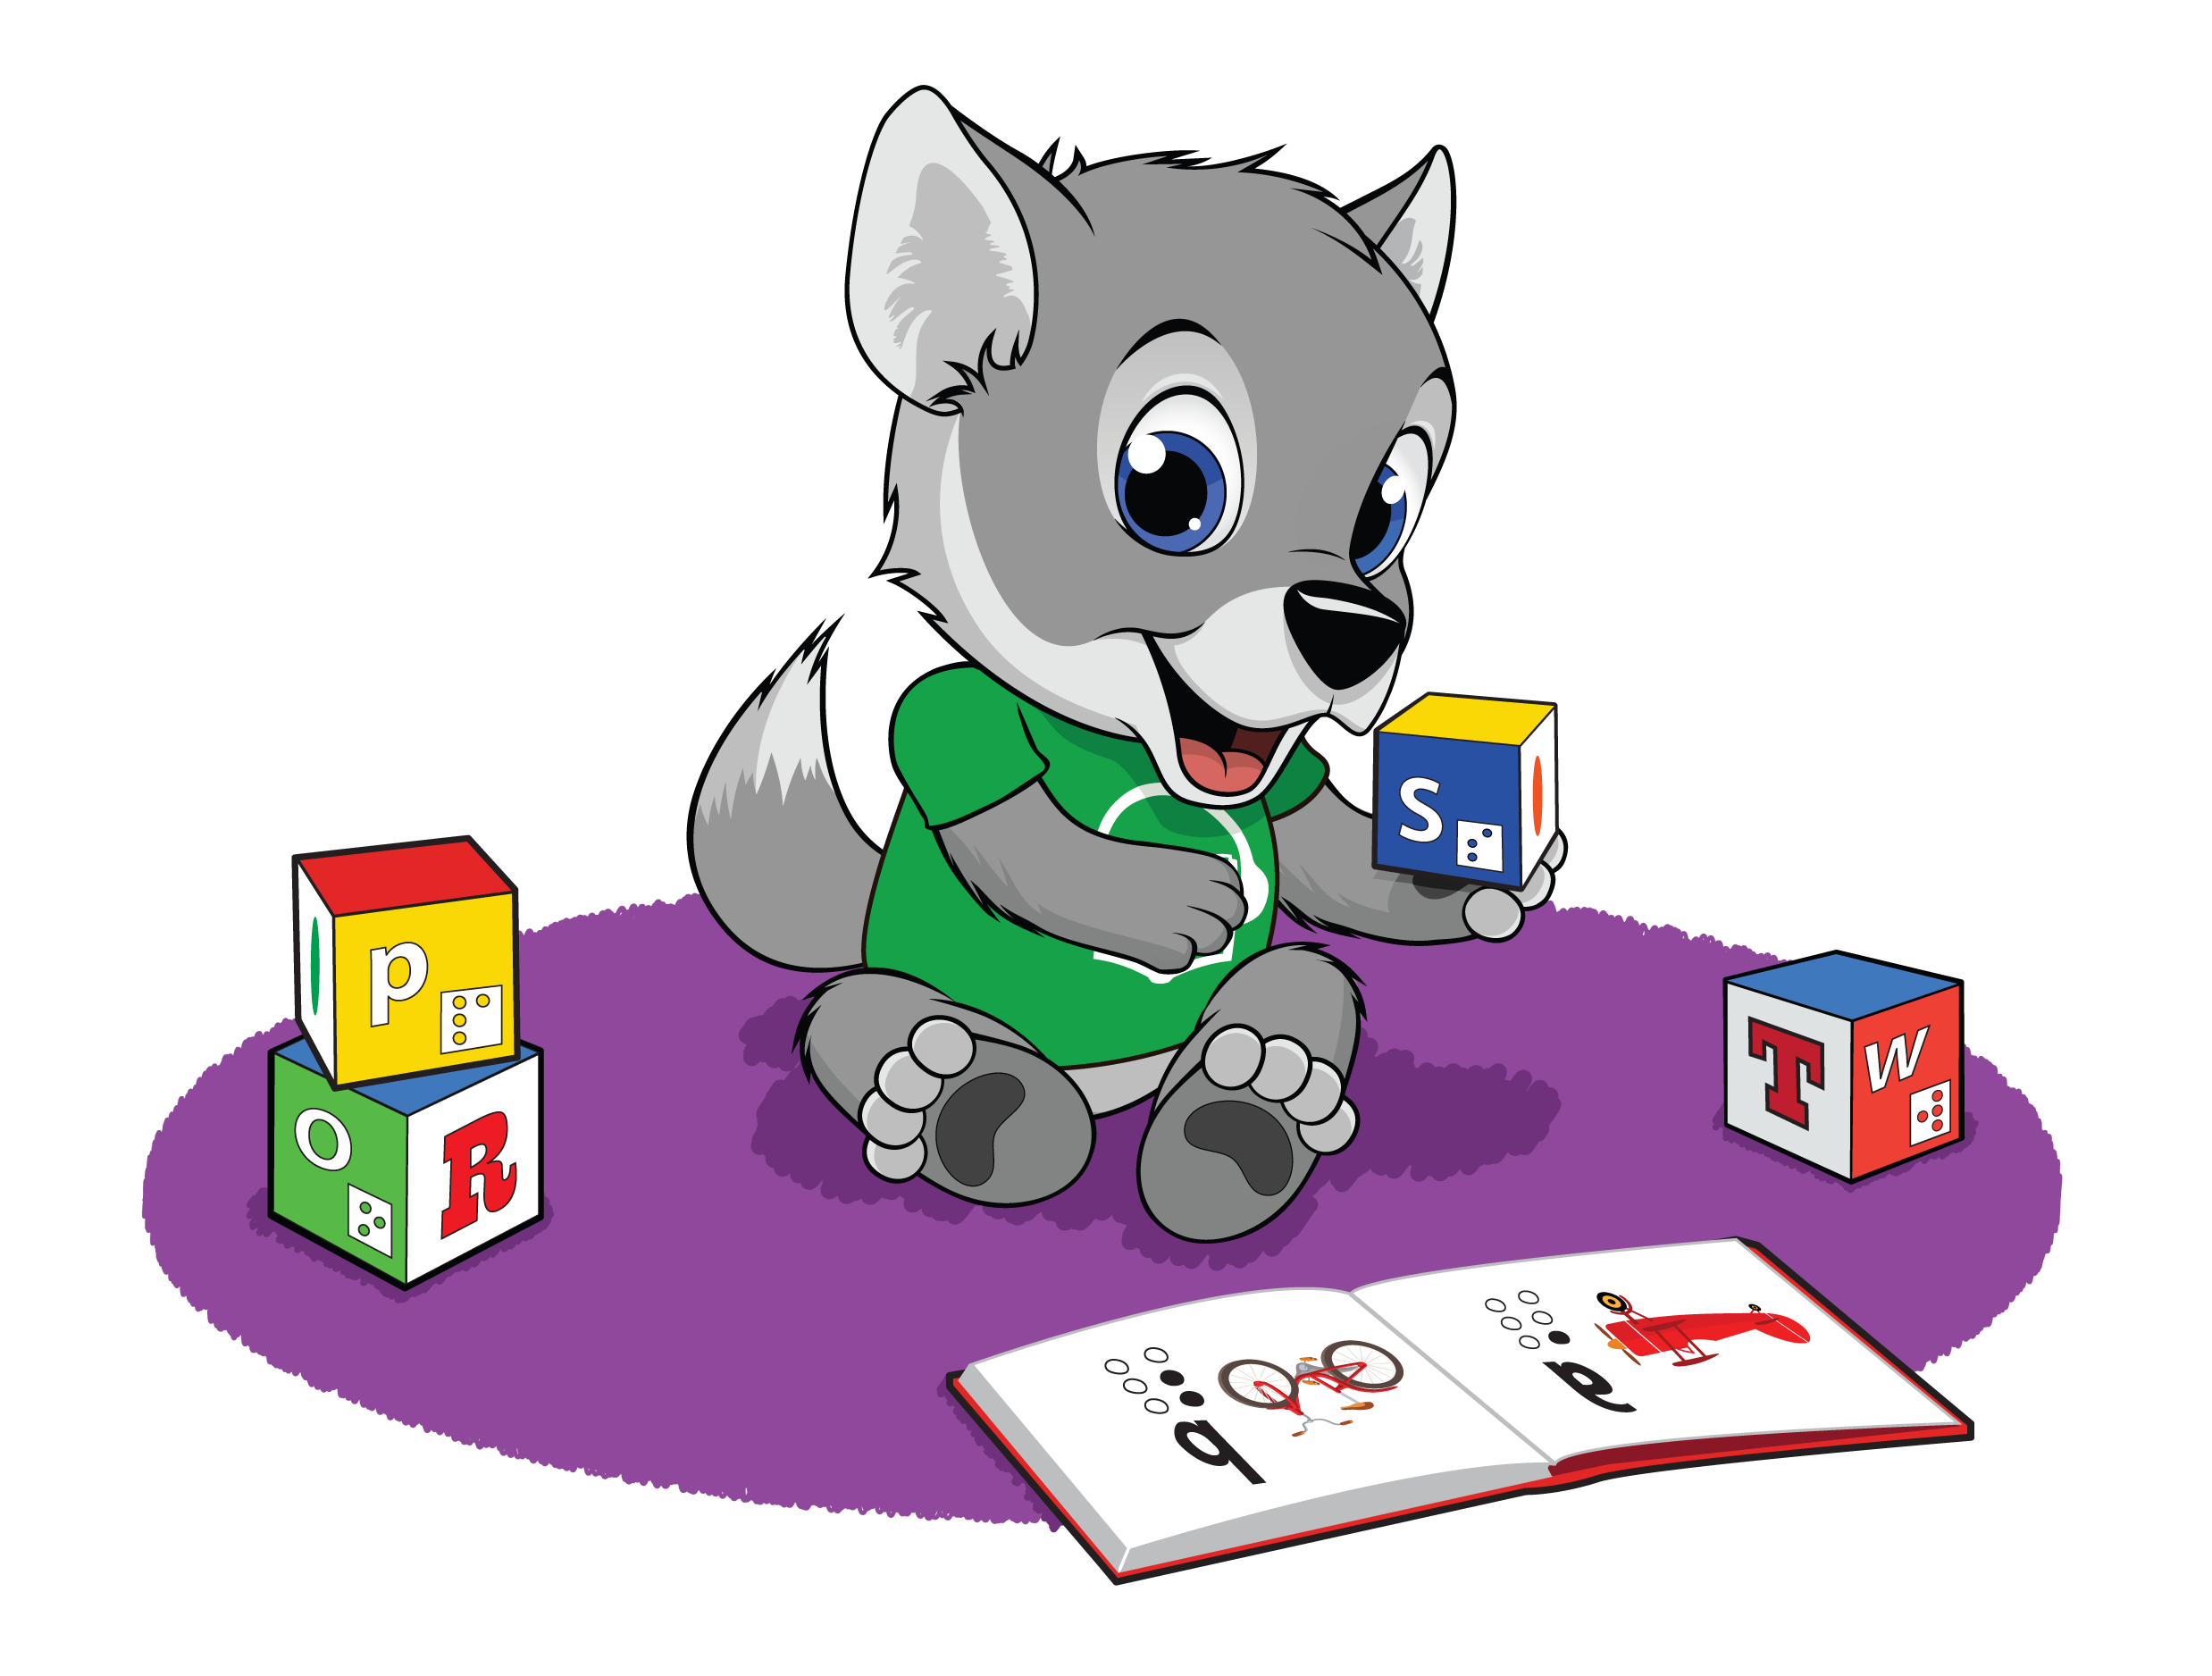 Wolfie holding a print/braille block with a print/braille book opened in front of him